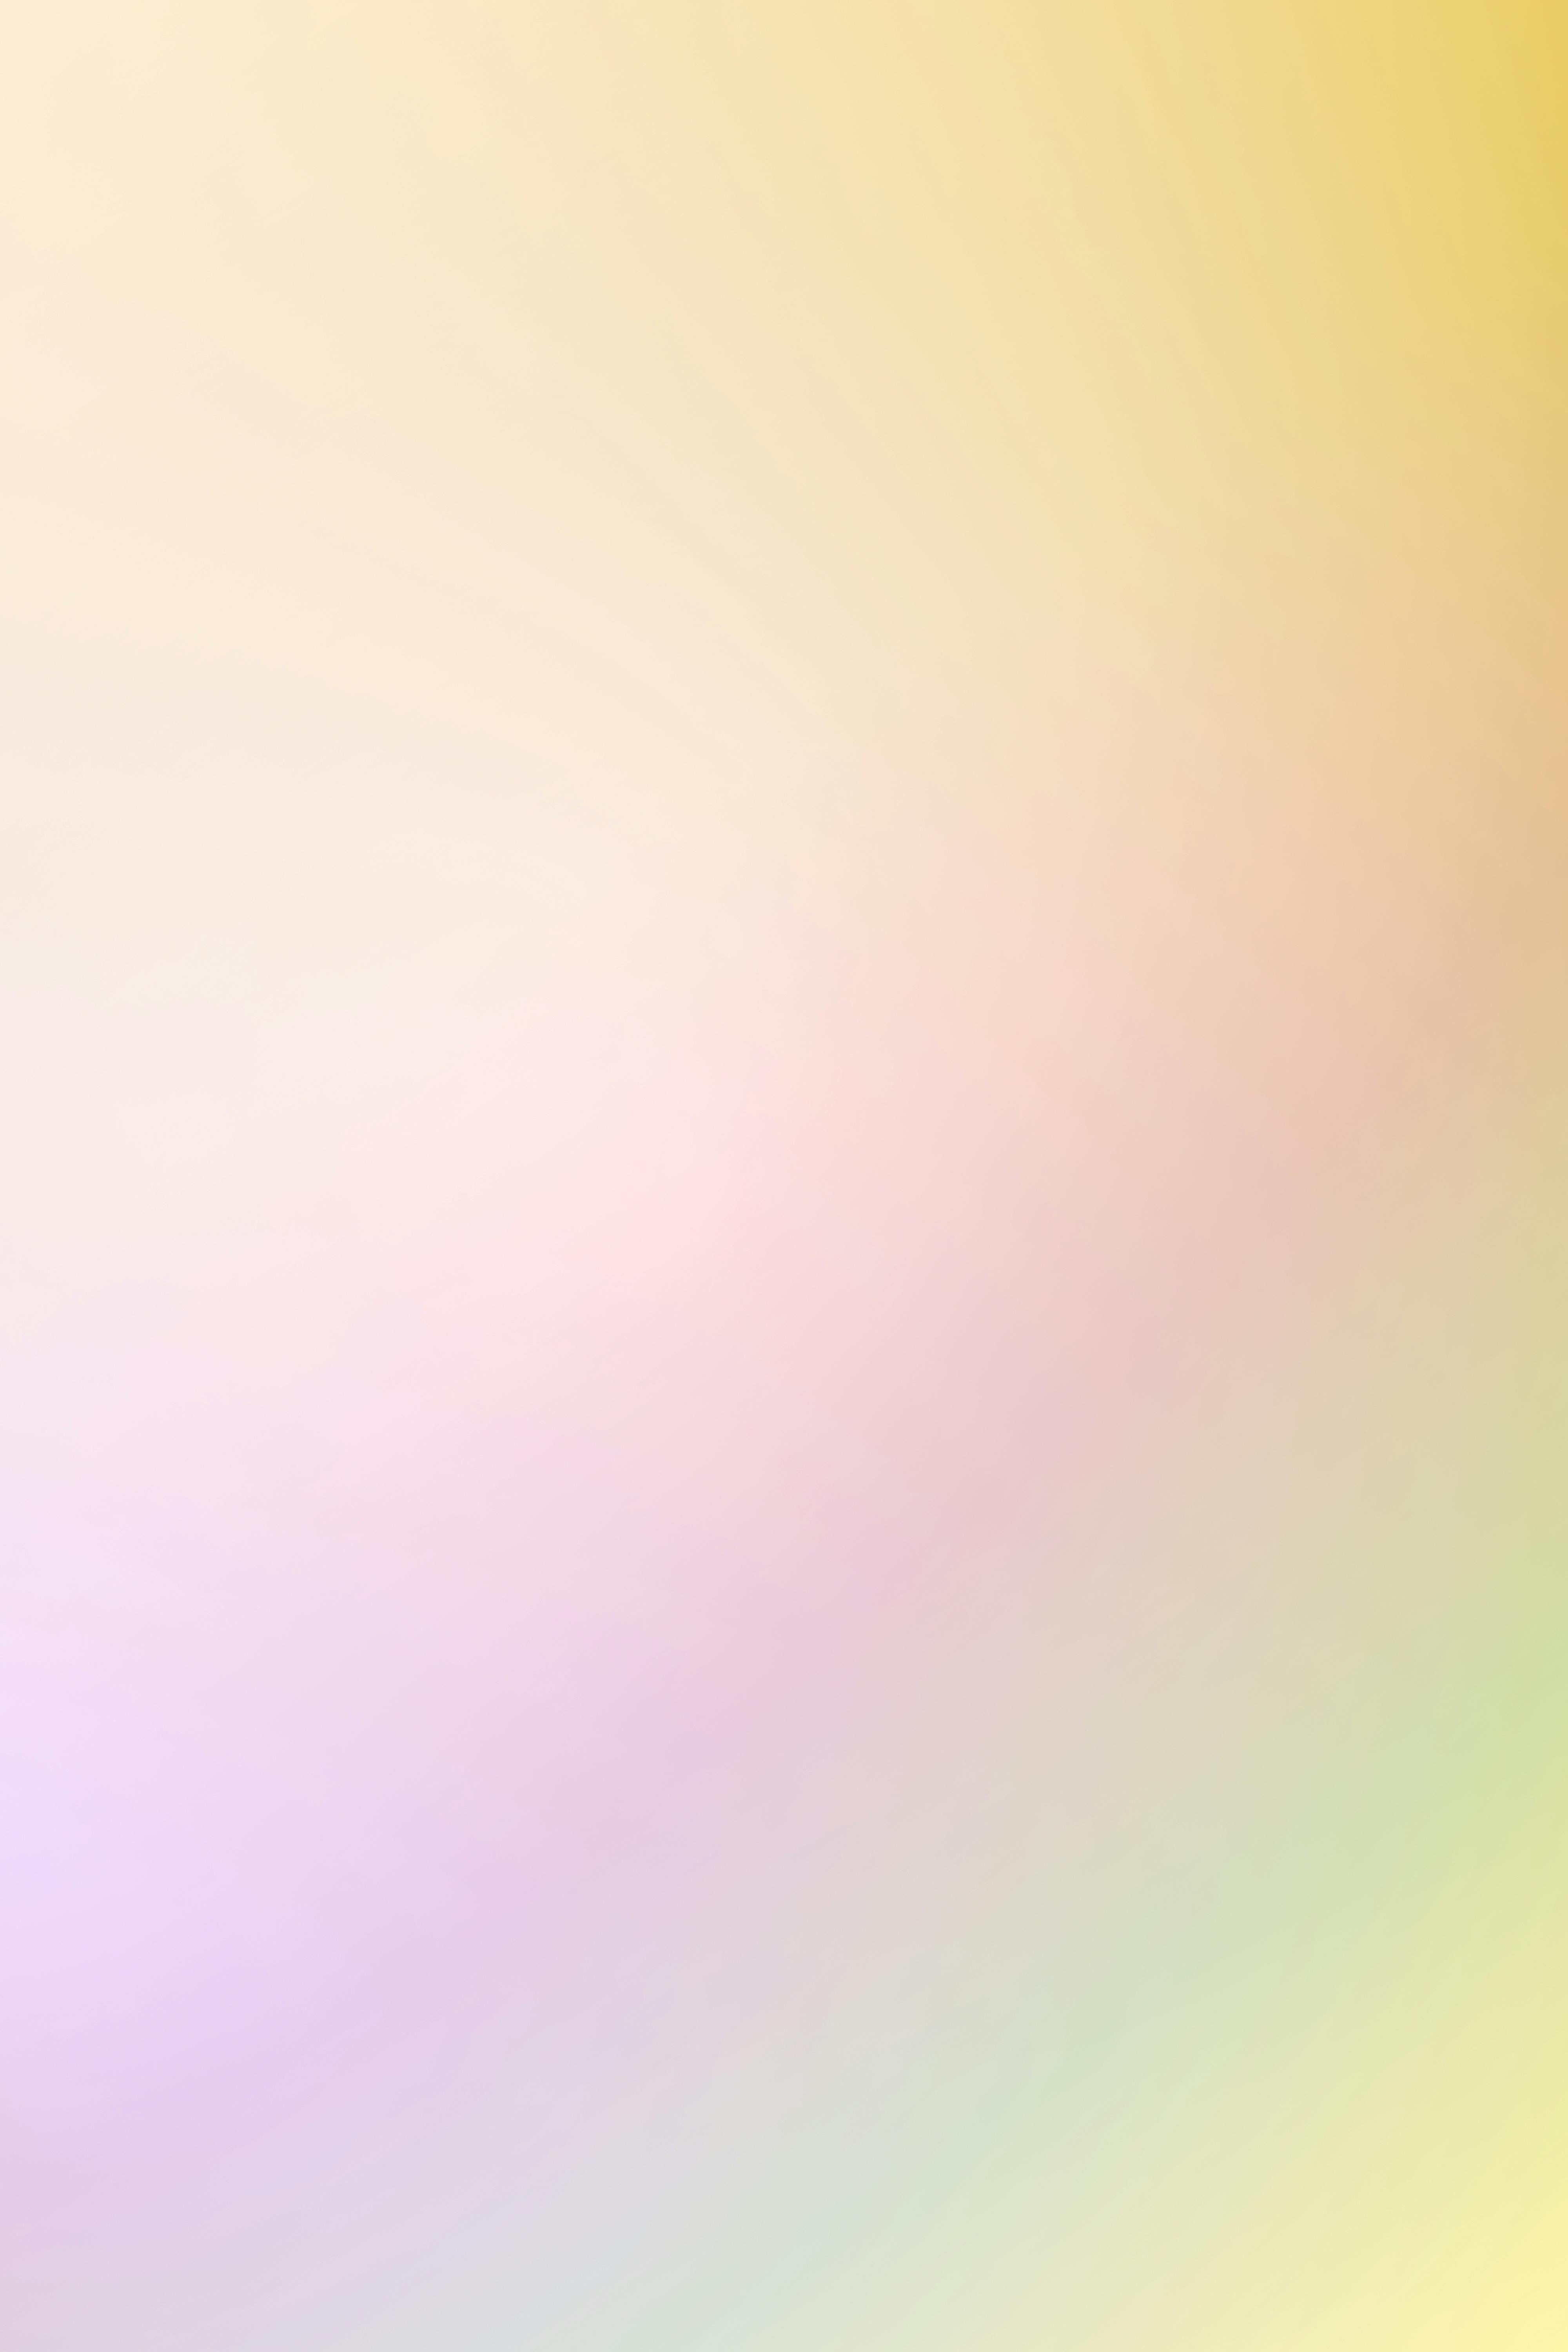 A Pastel Colored Gradient · Free Stock Photo